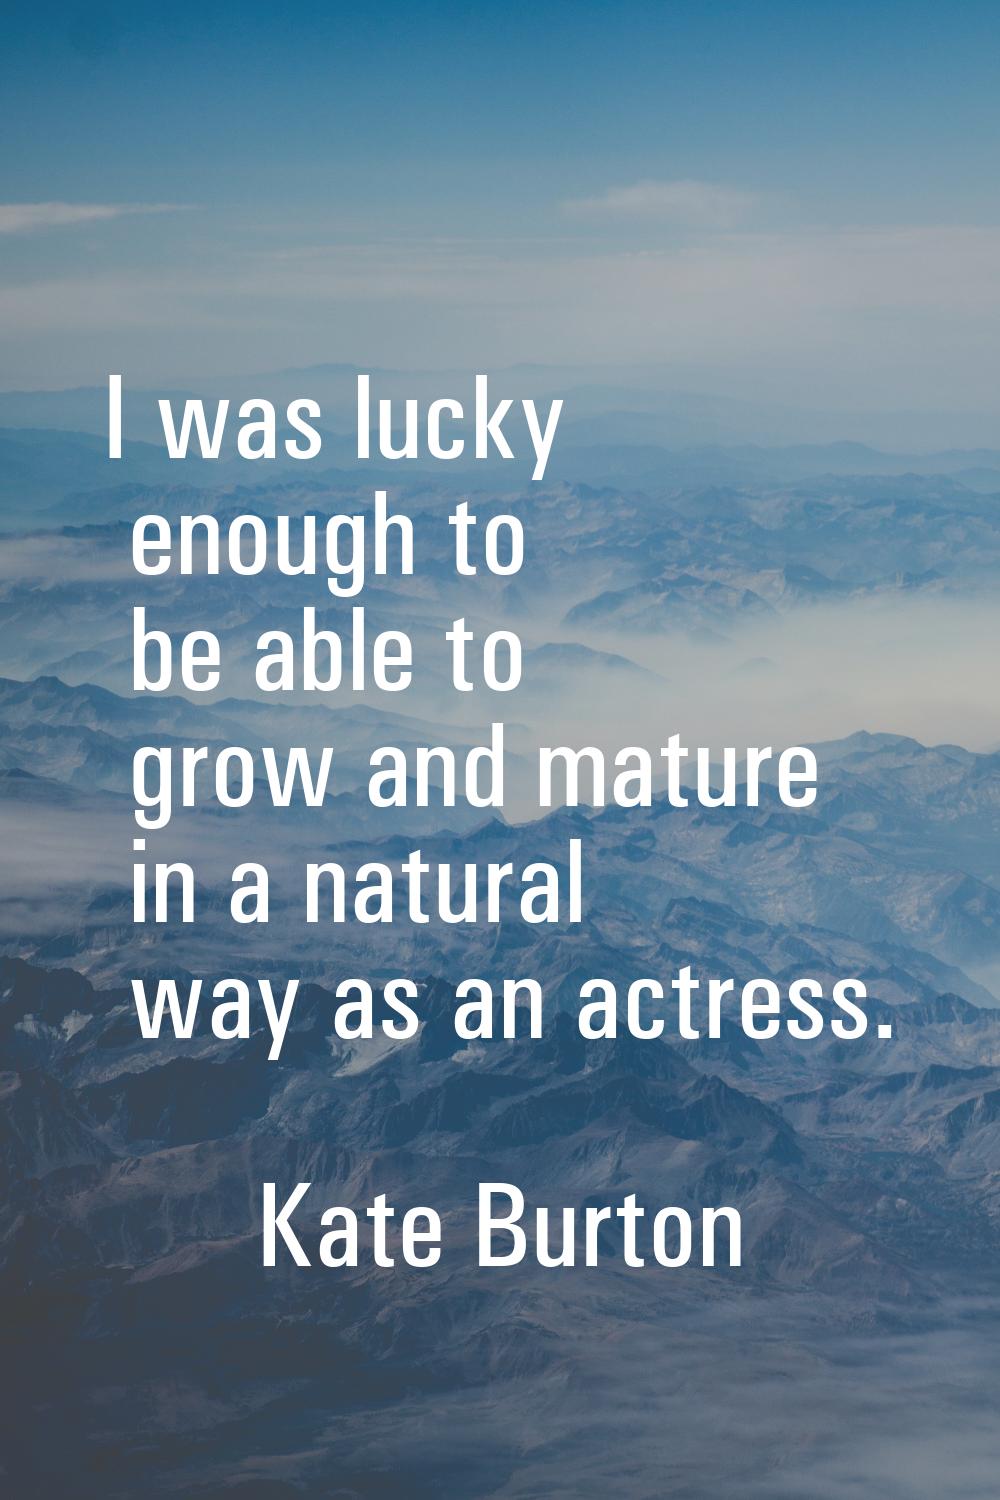 I was lucky enough to be able to grow and mature in a natural way as an actress.